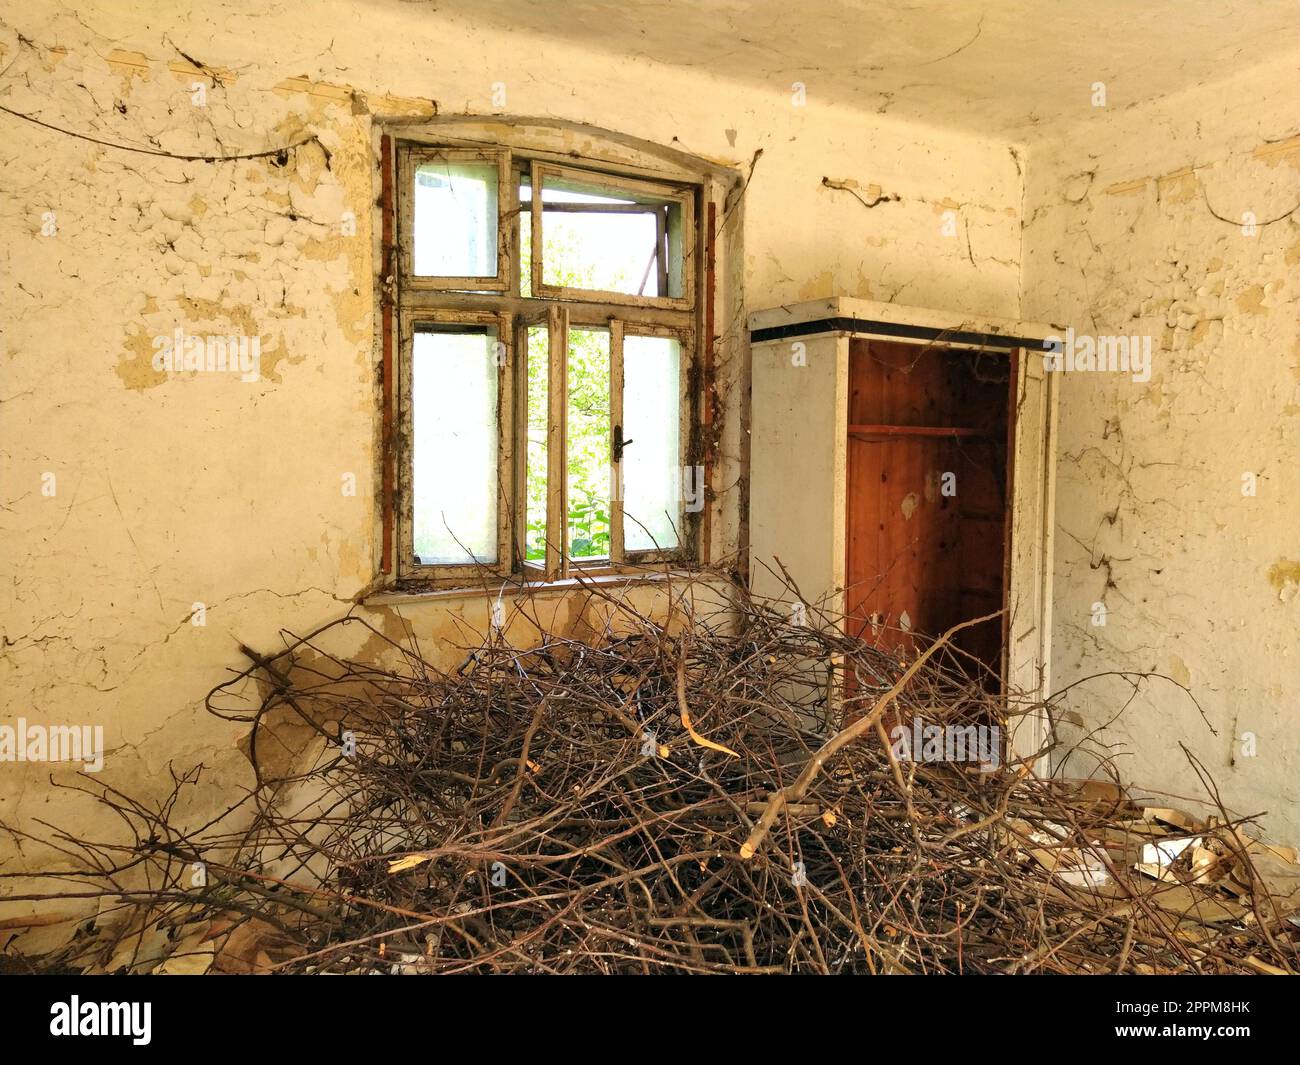 The interior of an abandoned old rural house with light cracked walls, an old beautiful window with broken glass and a floor covered with dirt, branches and brushwood. Stock Photo